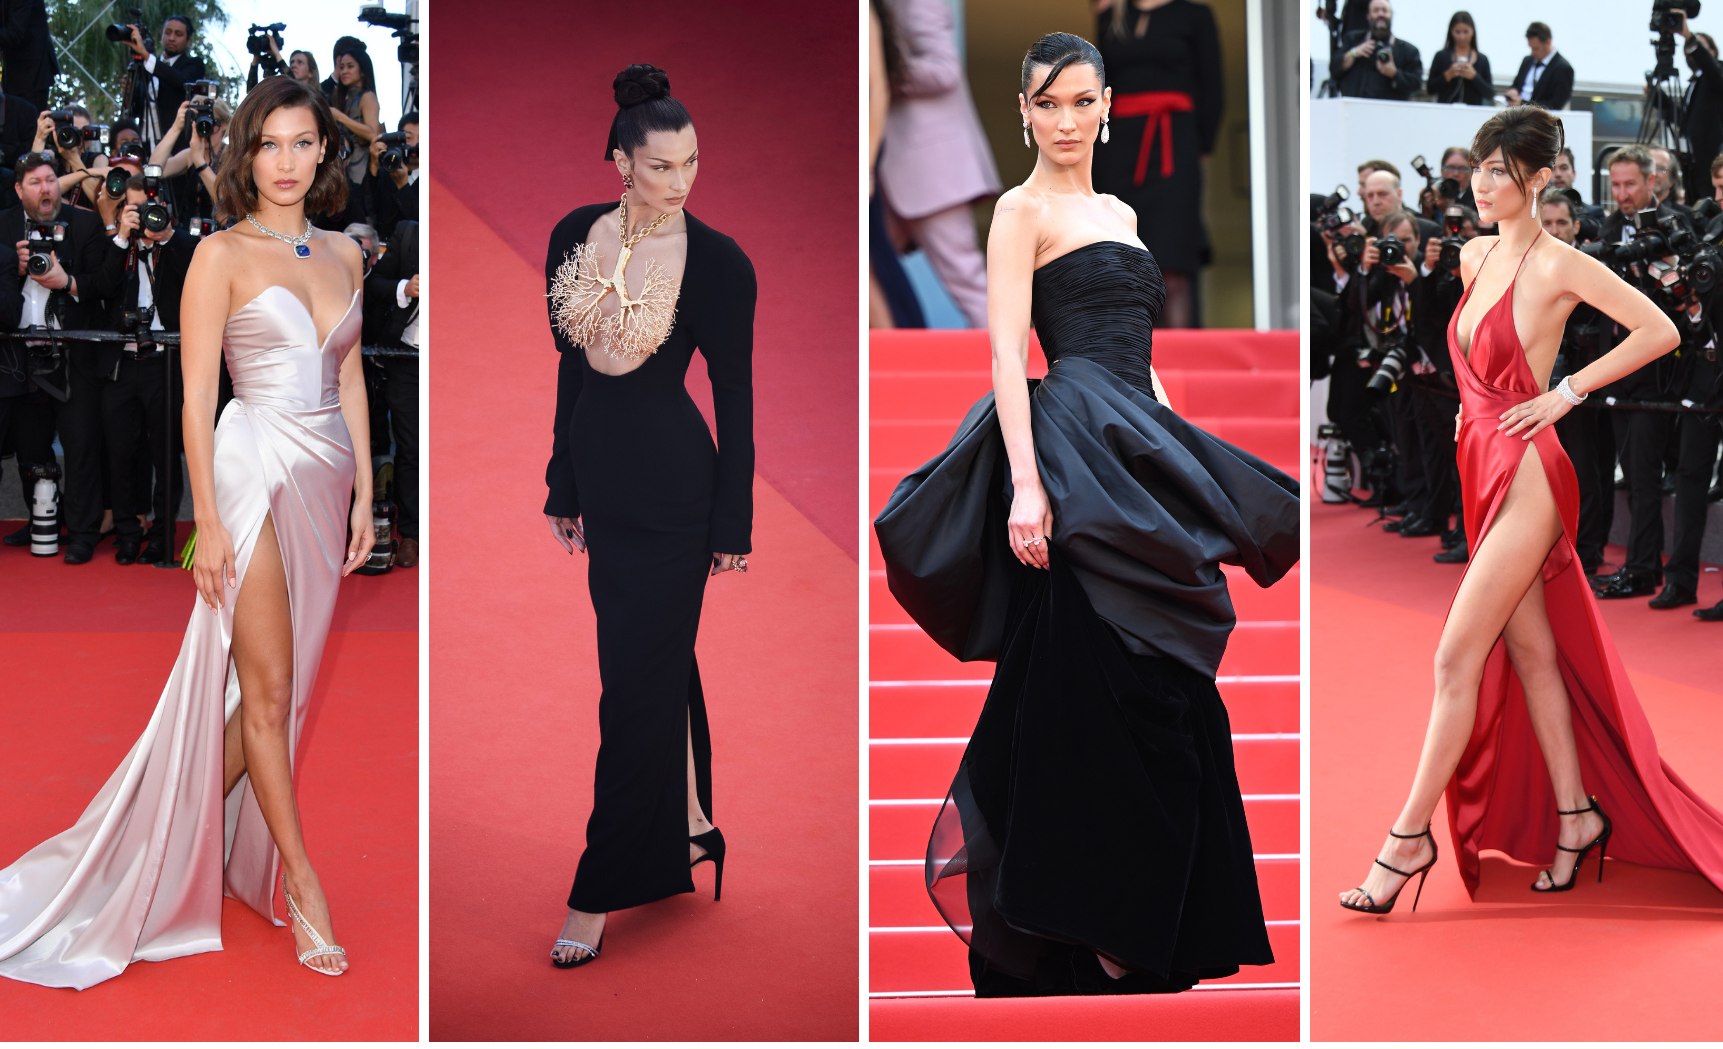 Bella Hadid's Best Looks from the Cannes Film Festival Red Carpet